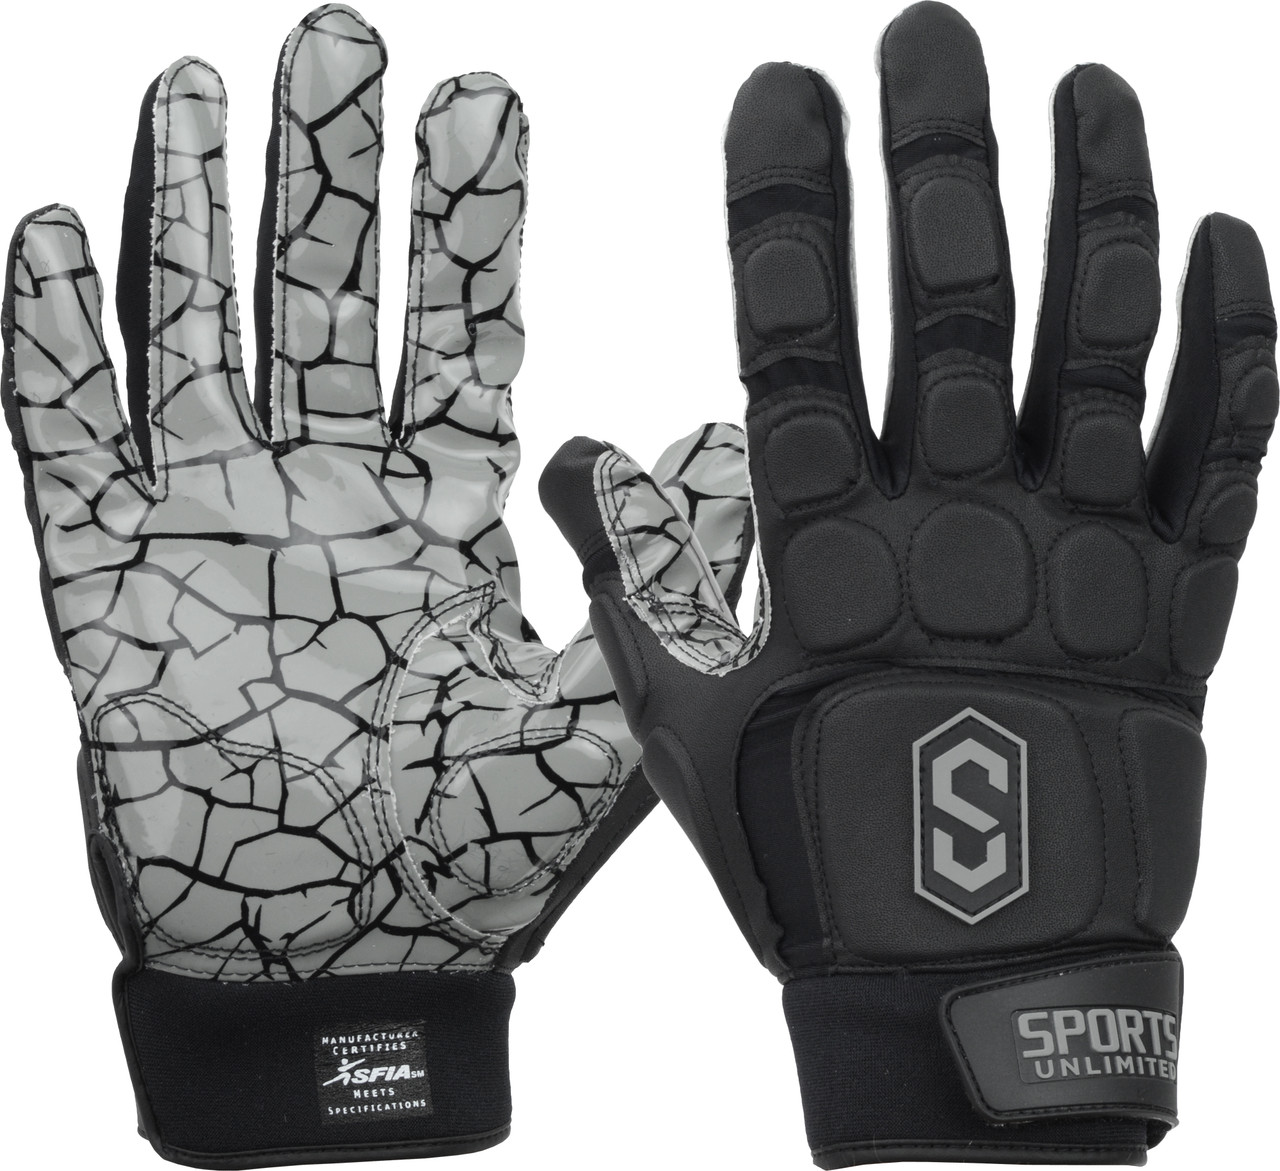 https://cdn11.bigcommerce.com/s-qq5h9nclzt/images/stencil/1280x1280/products/765/2171/sports-unlimited-max-clash-adult-padded-lineman-football-gloves_mainProductImage_Full__75674.1686022827.jpg?c=1